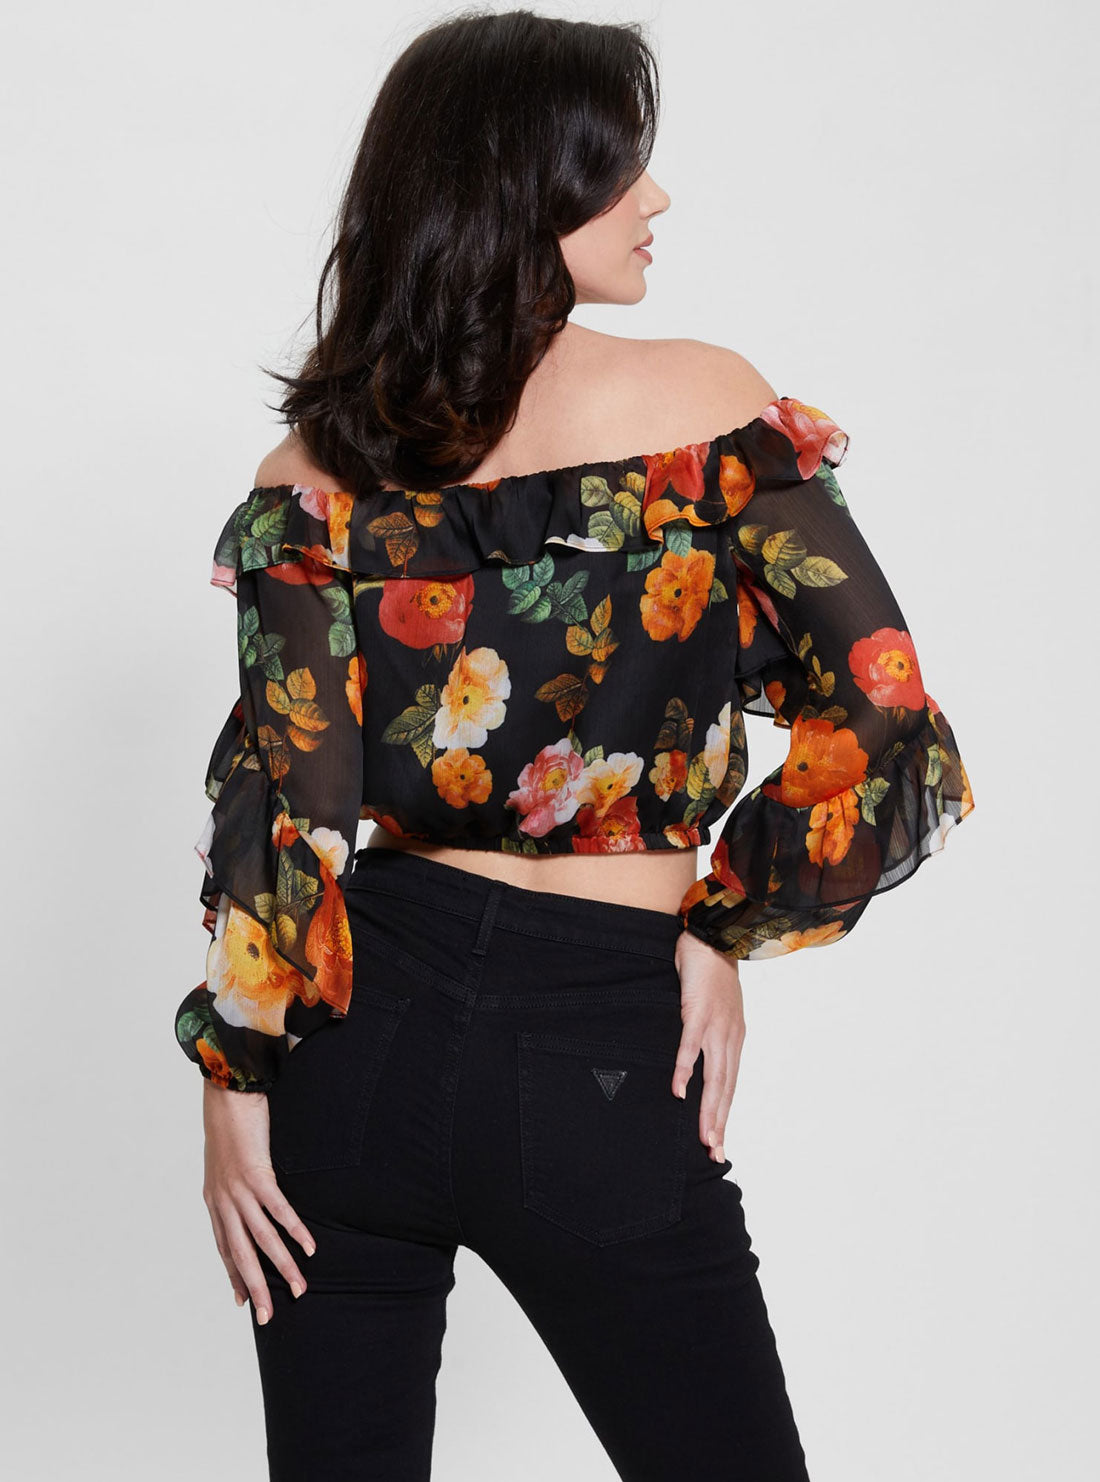 GUESS Black Floral Shani Ruffle Top back view